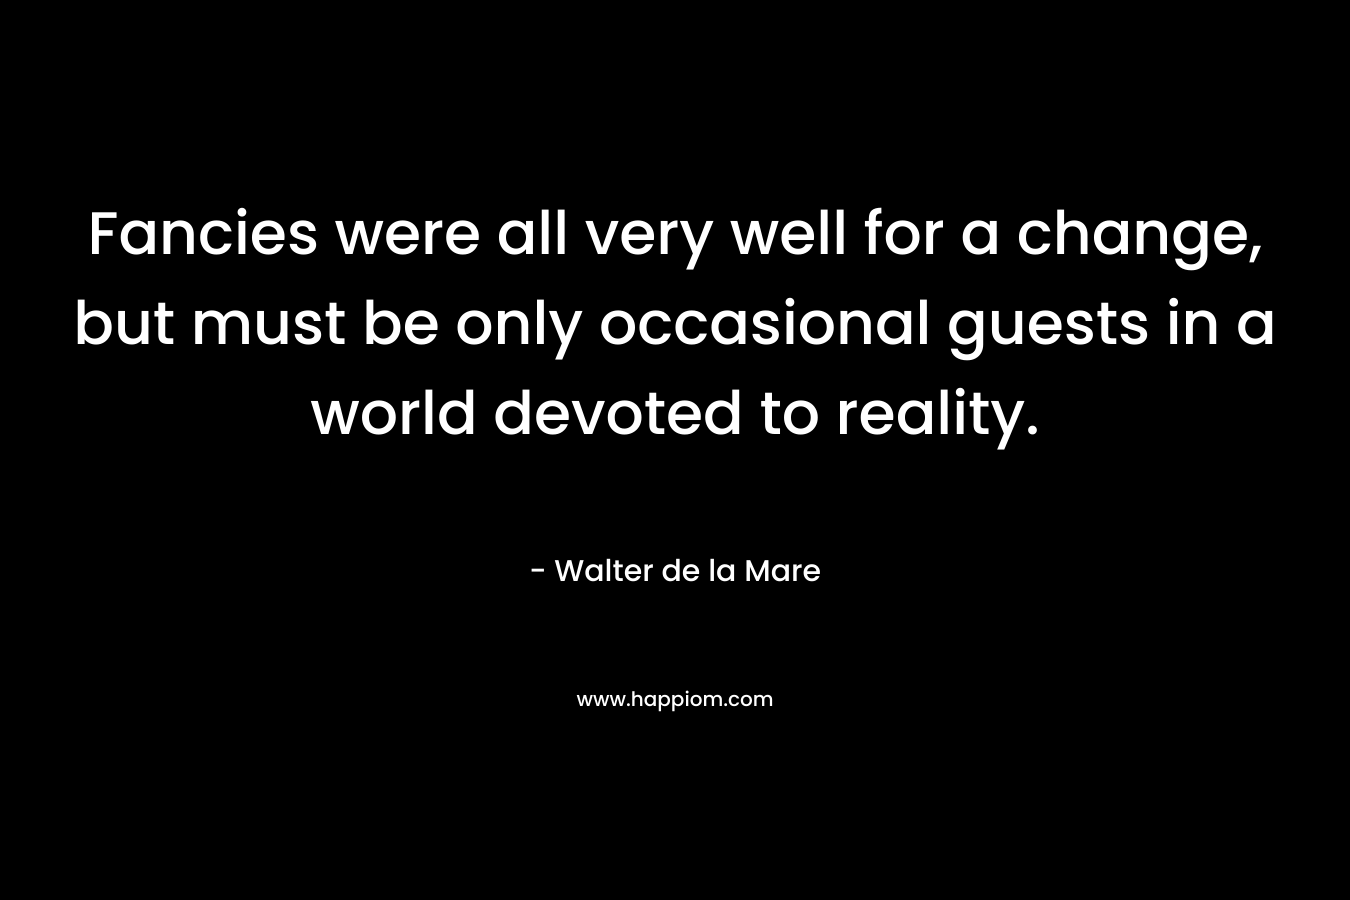 Fancies were all very well for a change, but must be only occasional guests in a world devoted to reality.